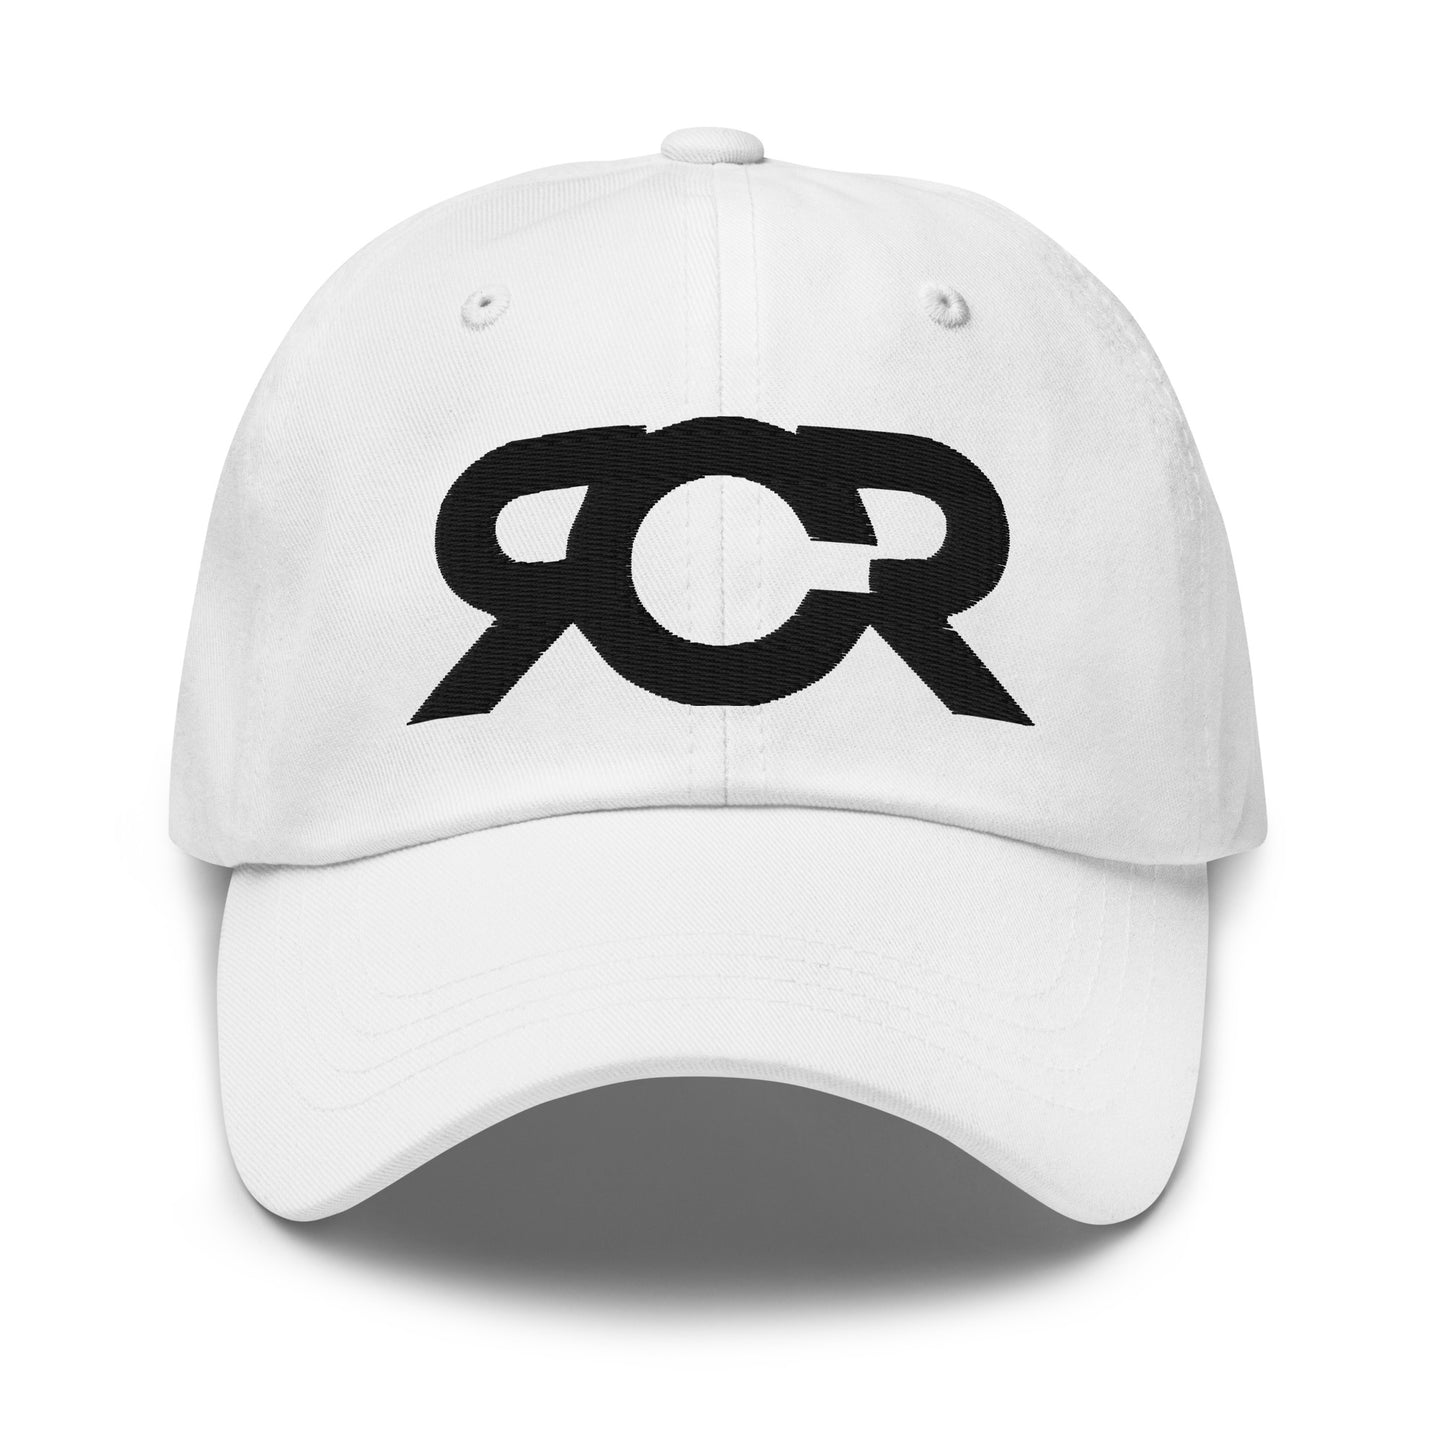 RCR Dad Hat with 3D Embroidered RCR